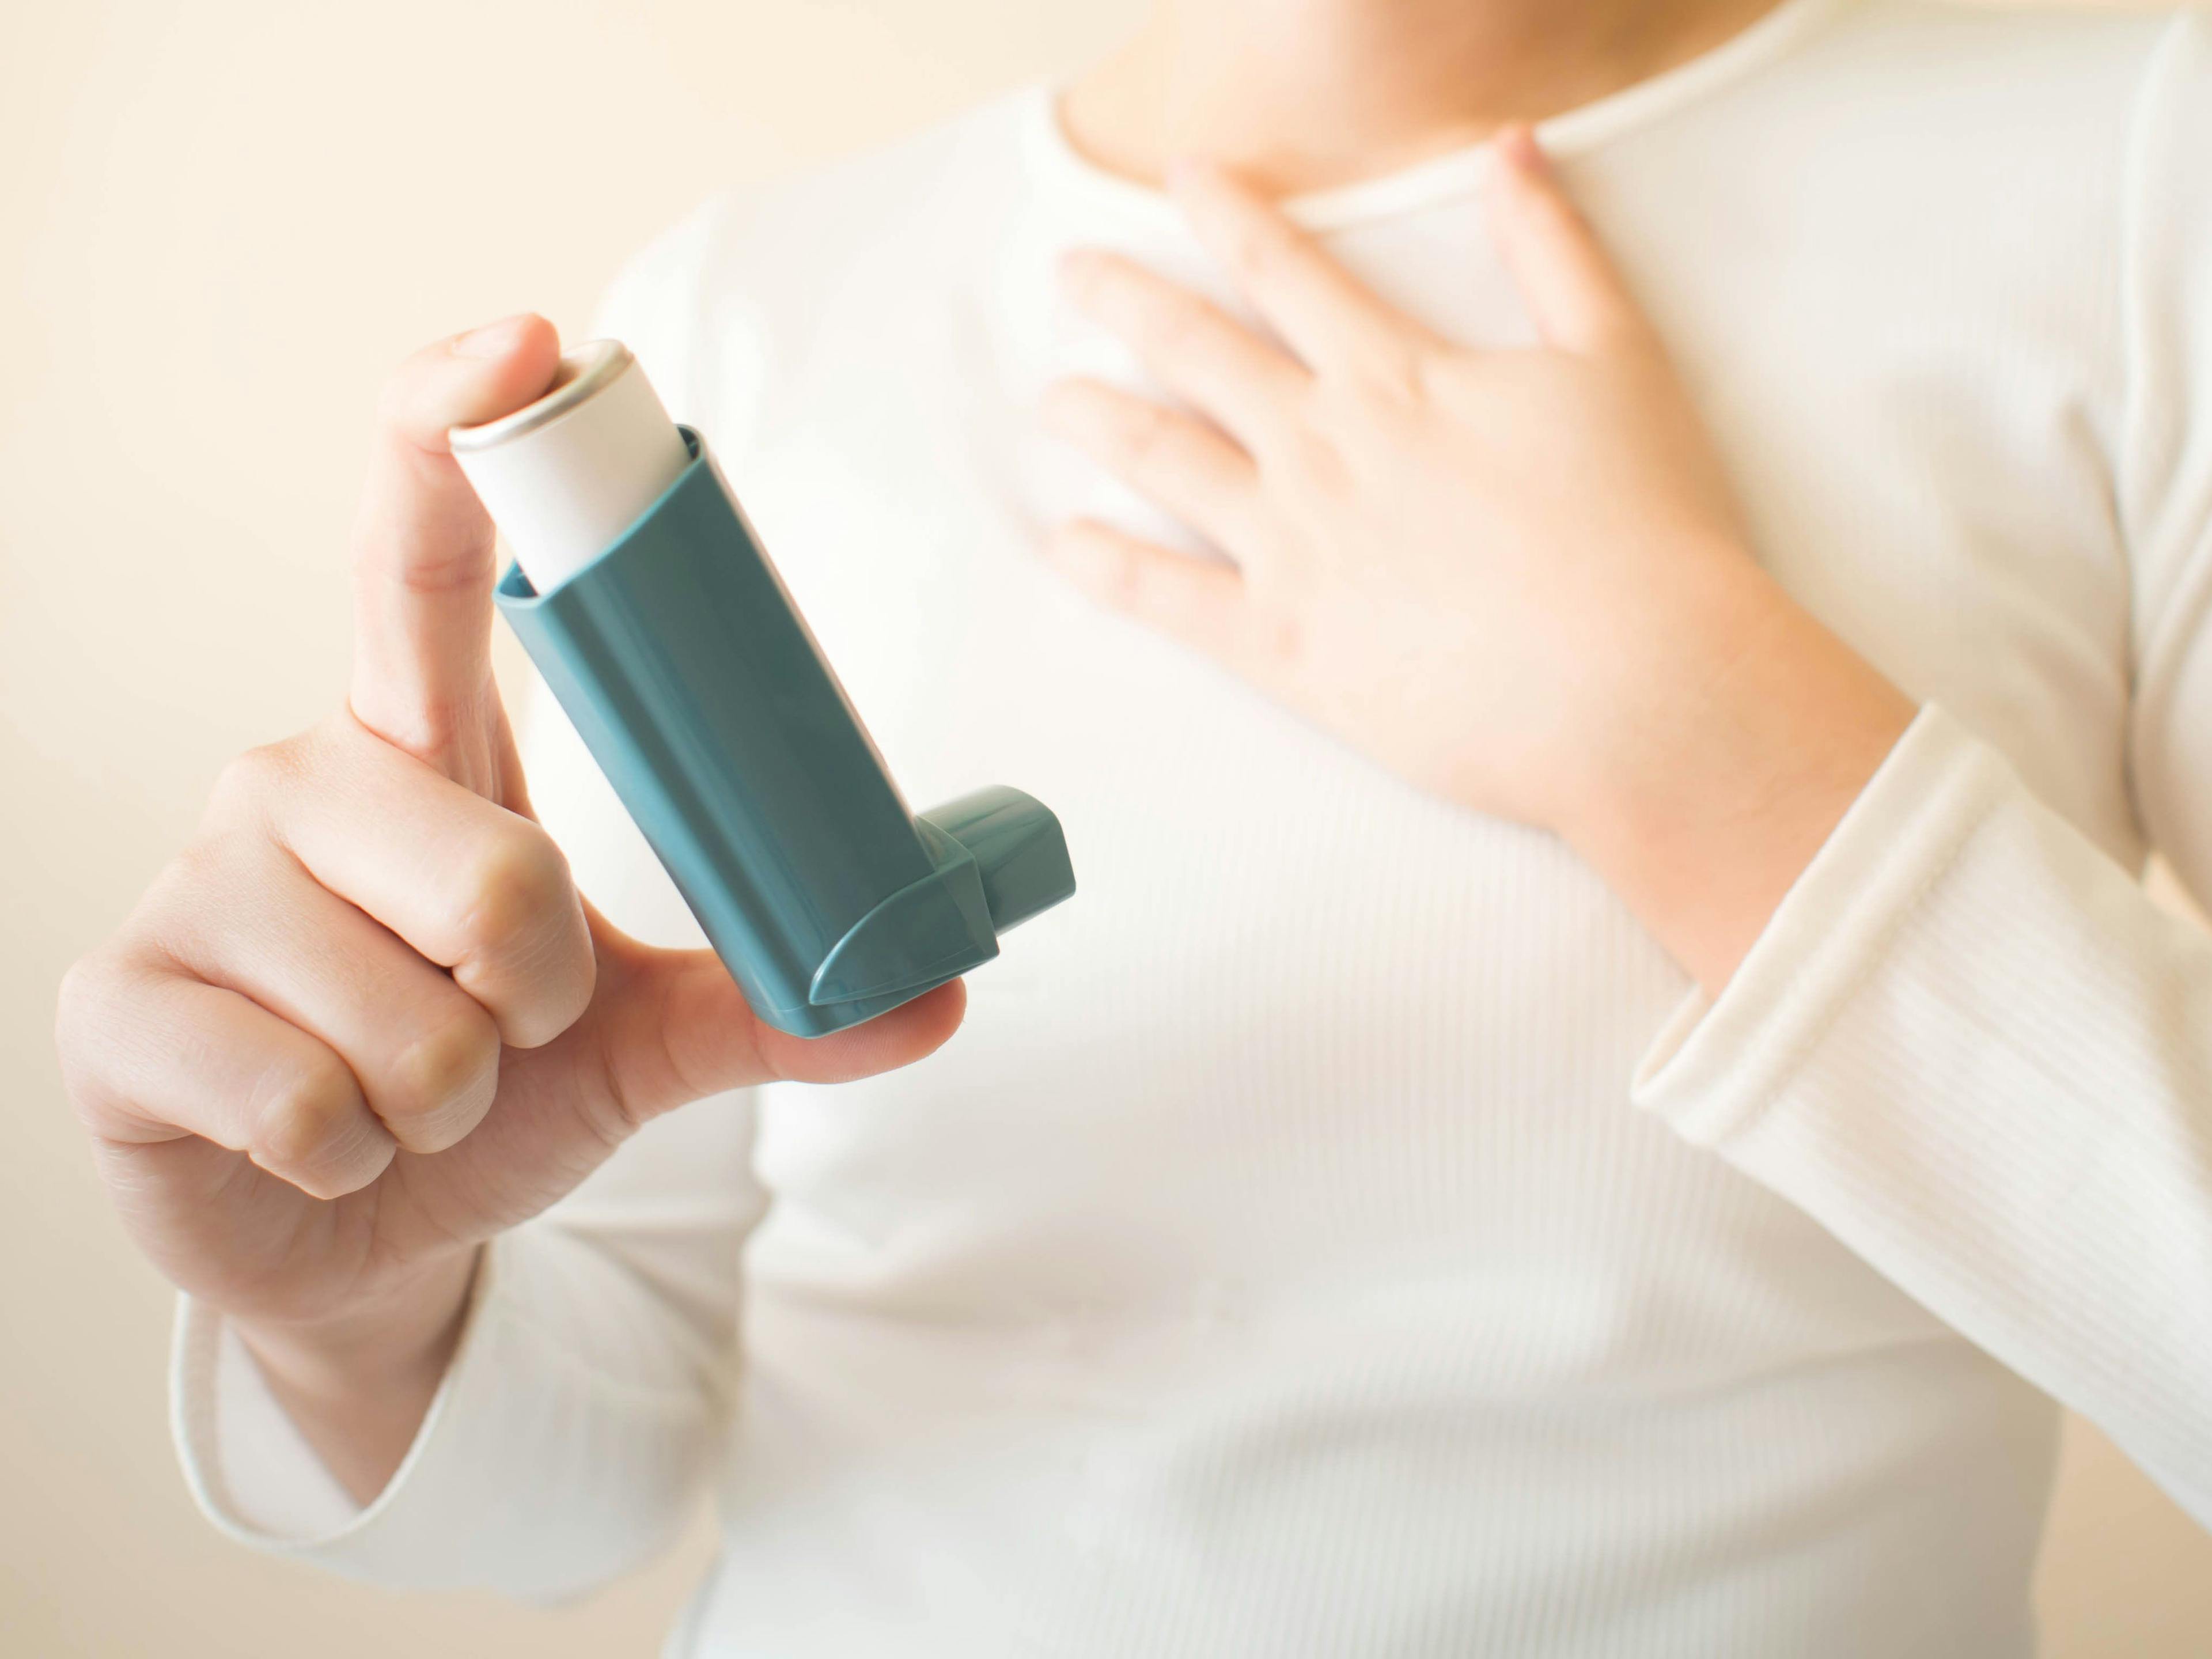 Small particulate matter increased risk of childhood asthma